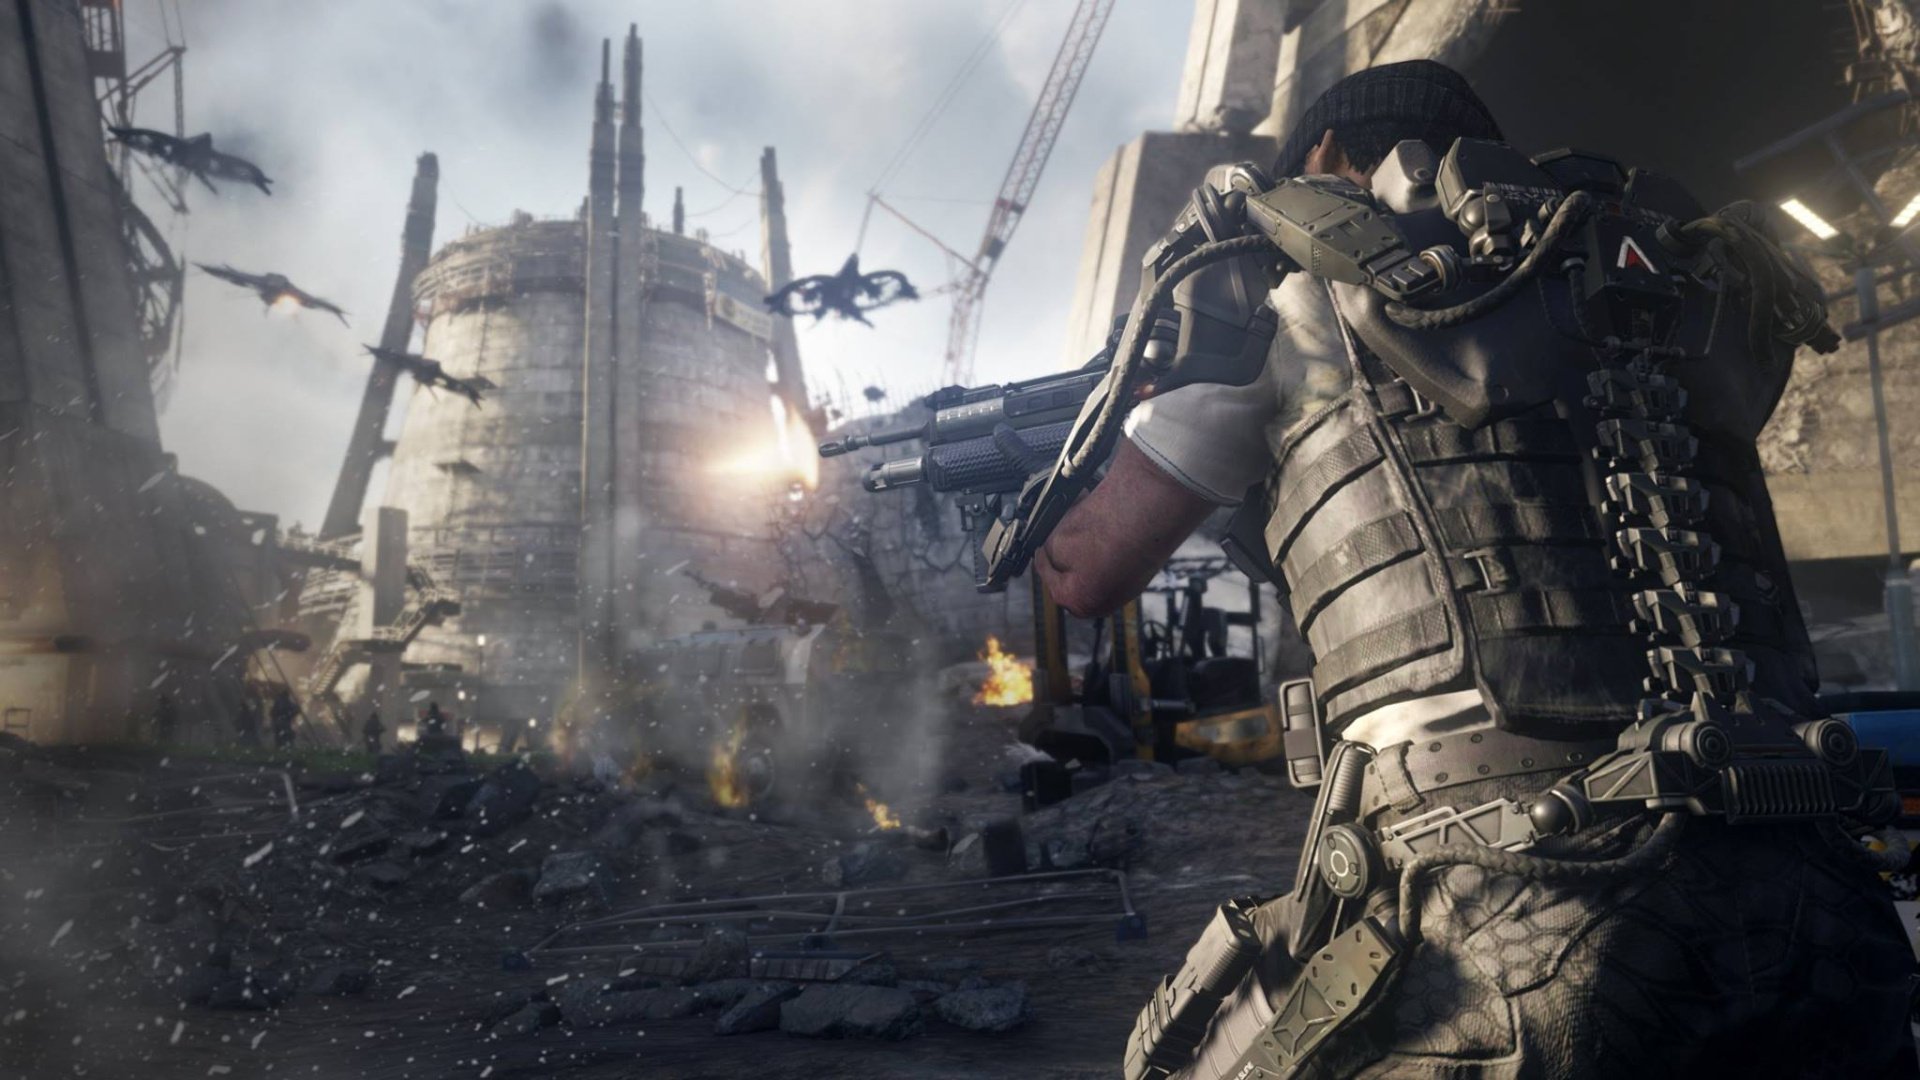 Call of Duty: Advanced Warfare (for PlayStation 4) Review